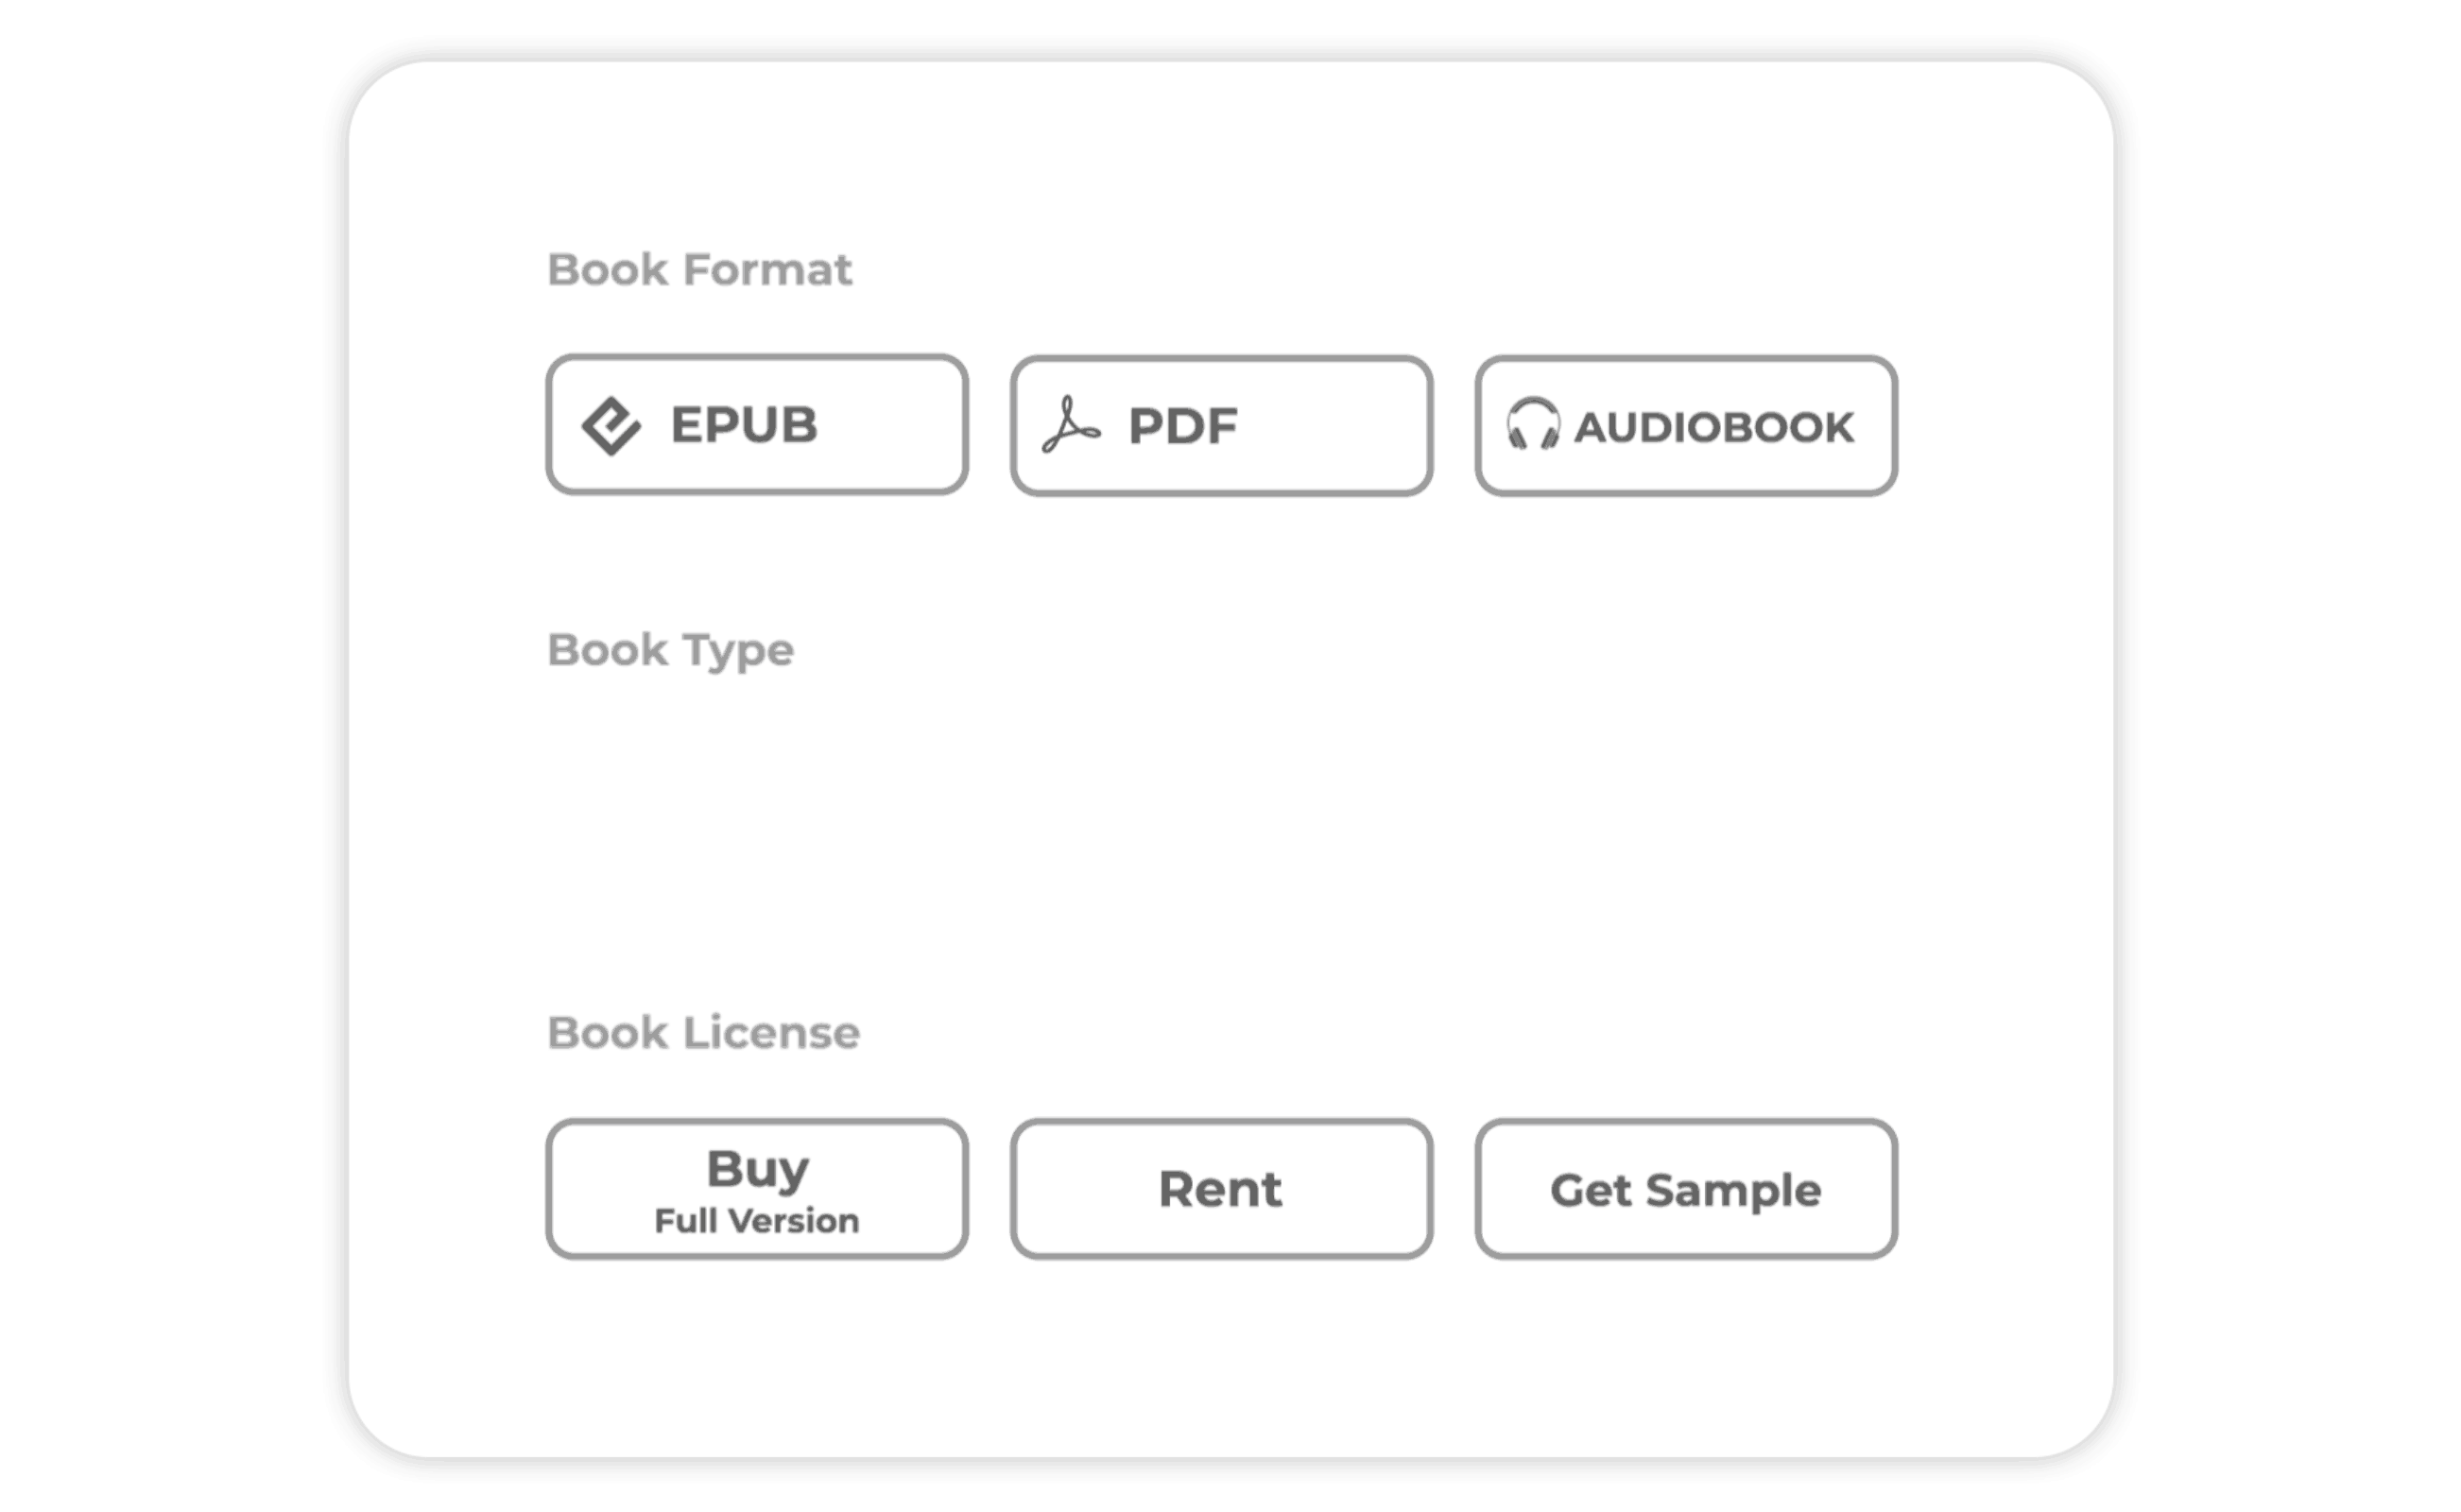 A GIF image showing Book Format, Book Type, and Book License as Options in an Advanced Book 